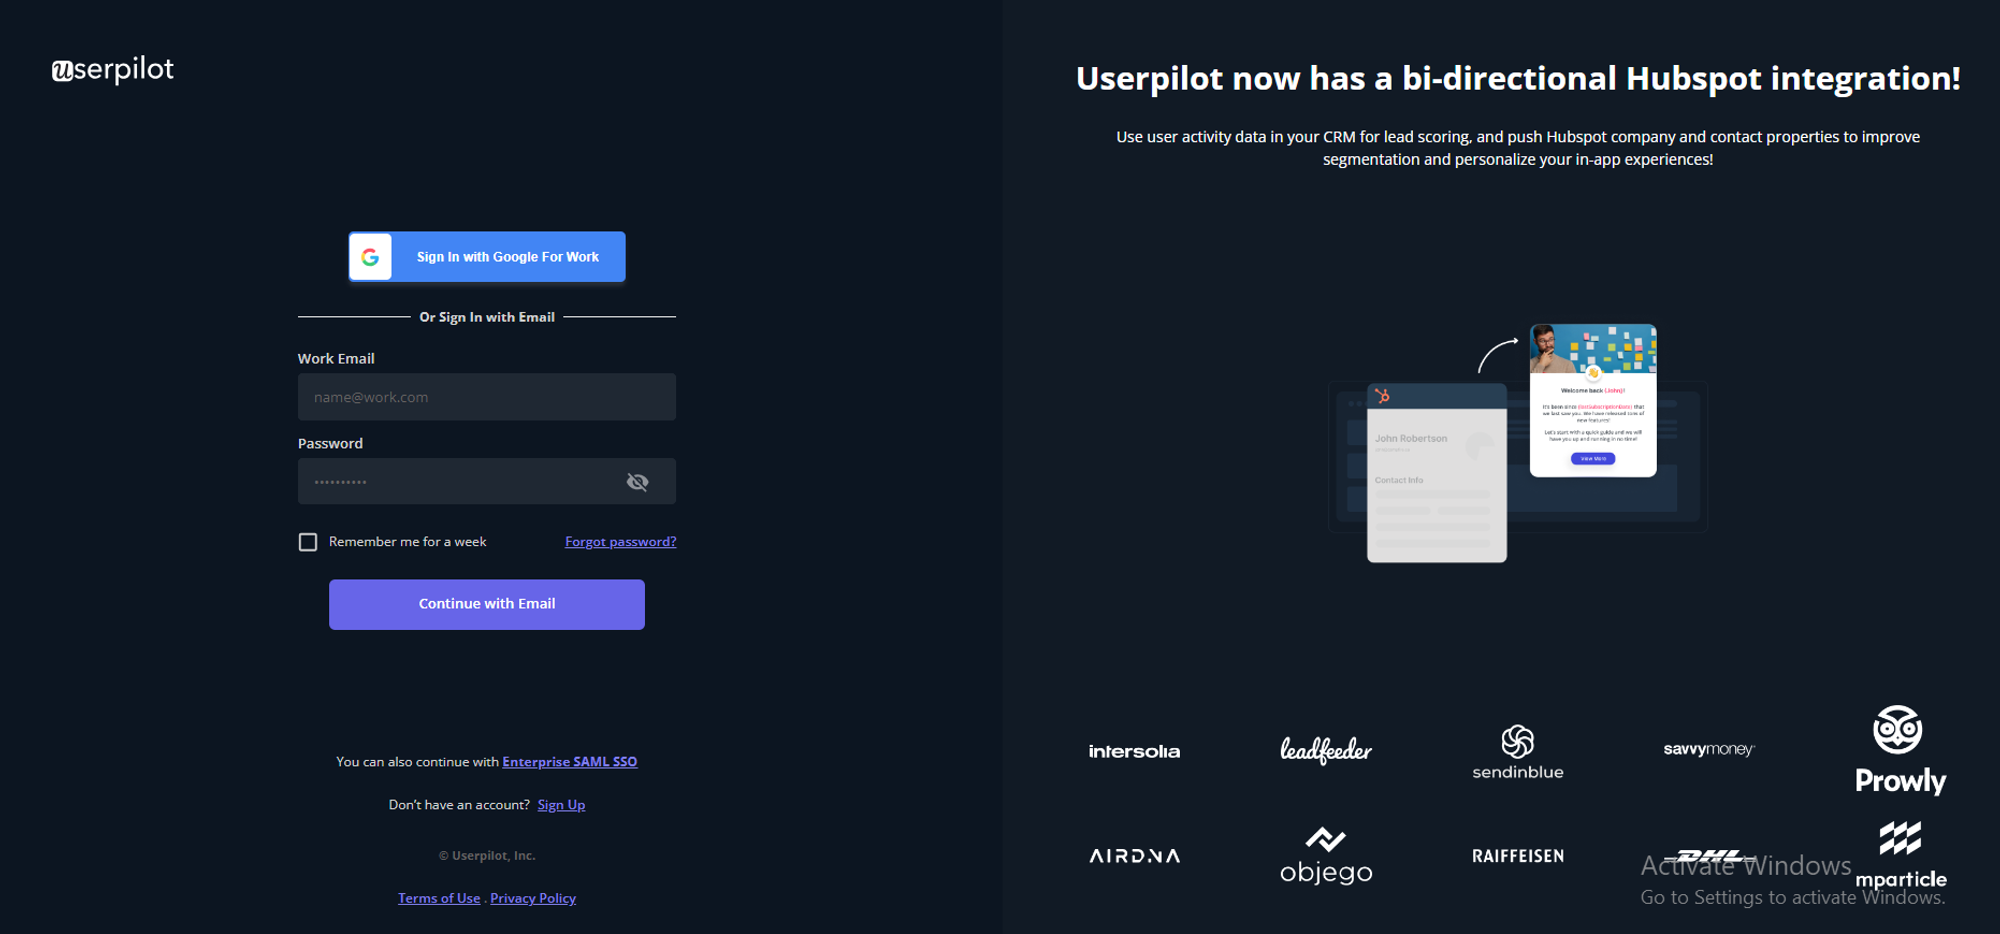 Userpilot offers a simple sign-up flow to improve user activation